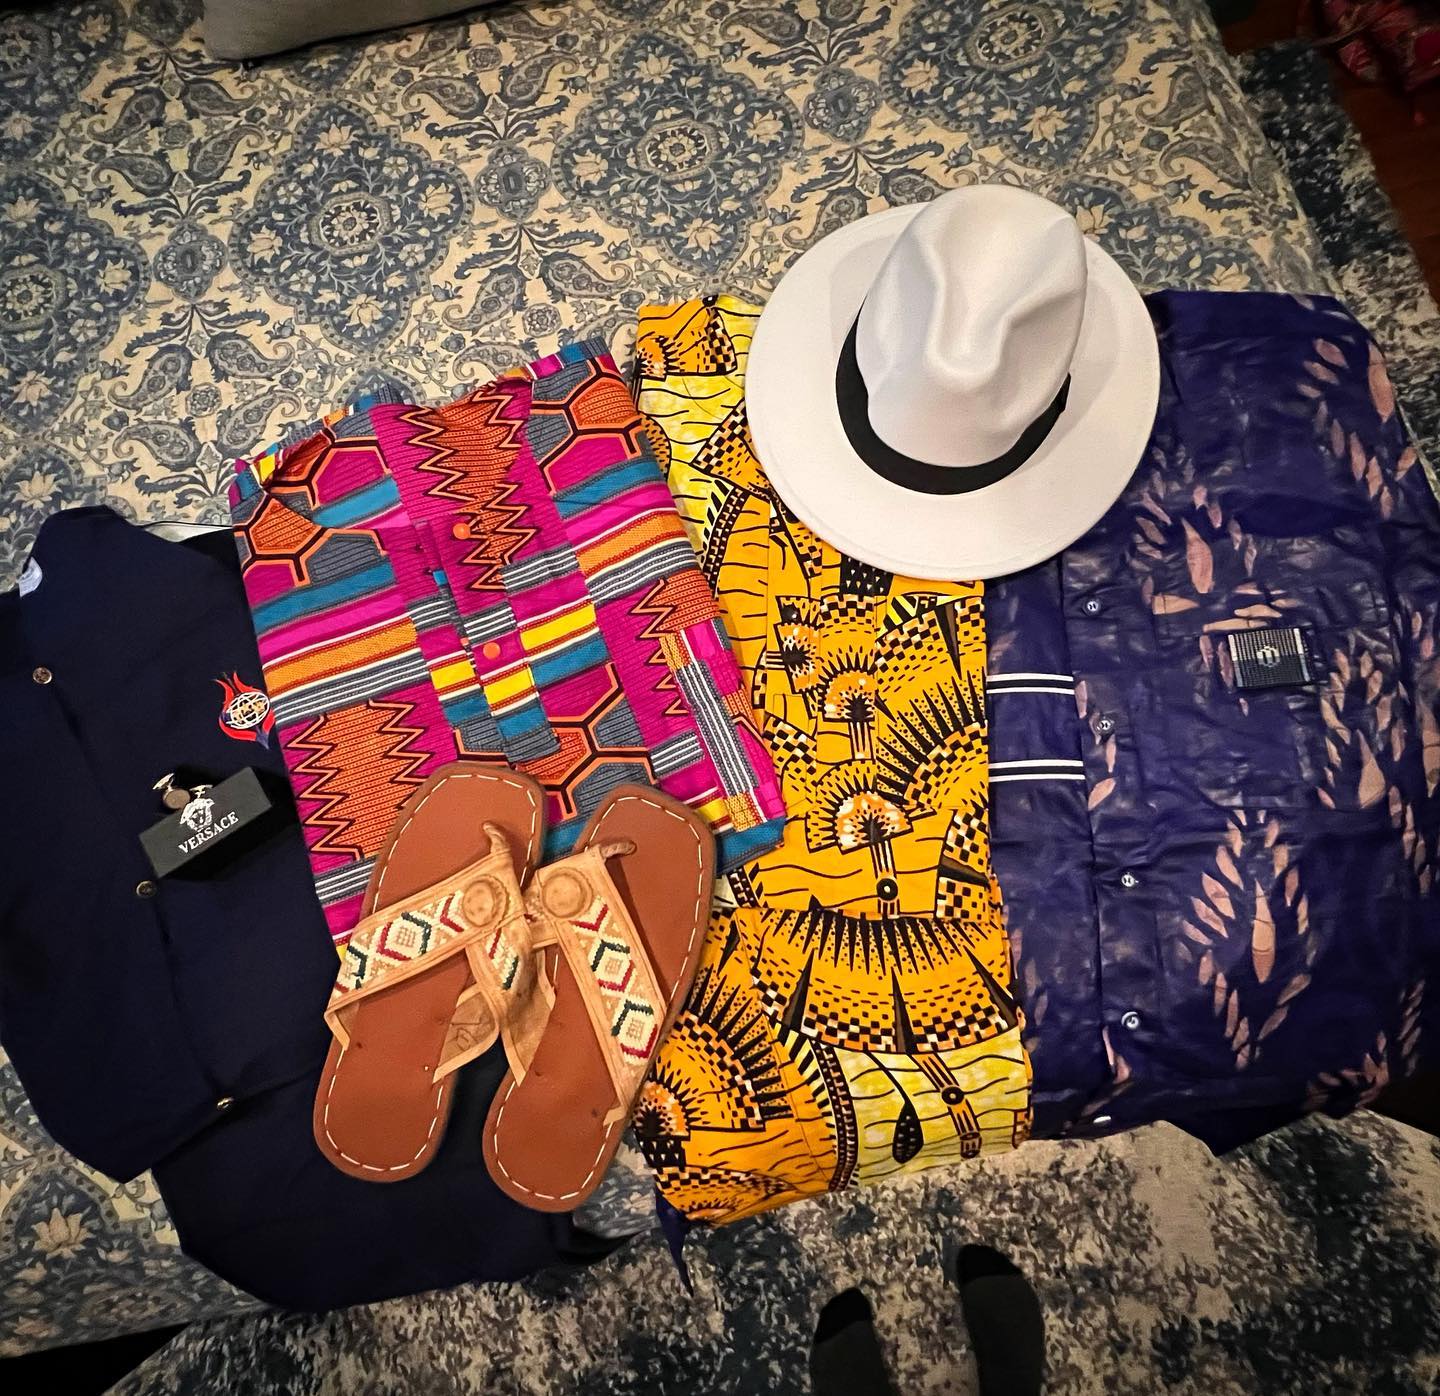 After 33 hours of travel, I’m taking the day to rest and unpack. My Côte d’Ivoire family added some colorful and beautiful new garments to my wardrobe.